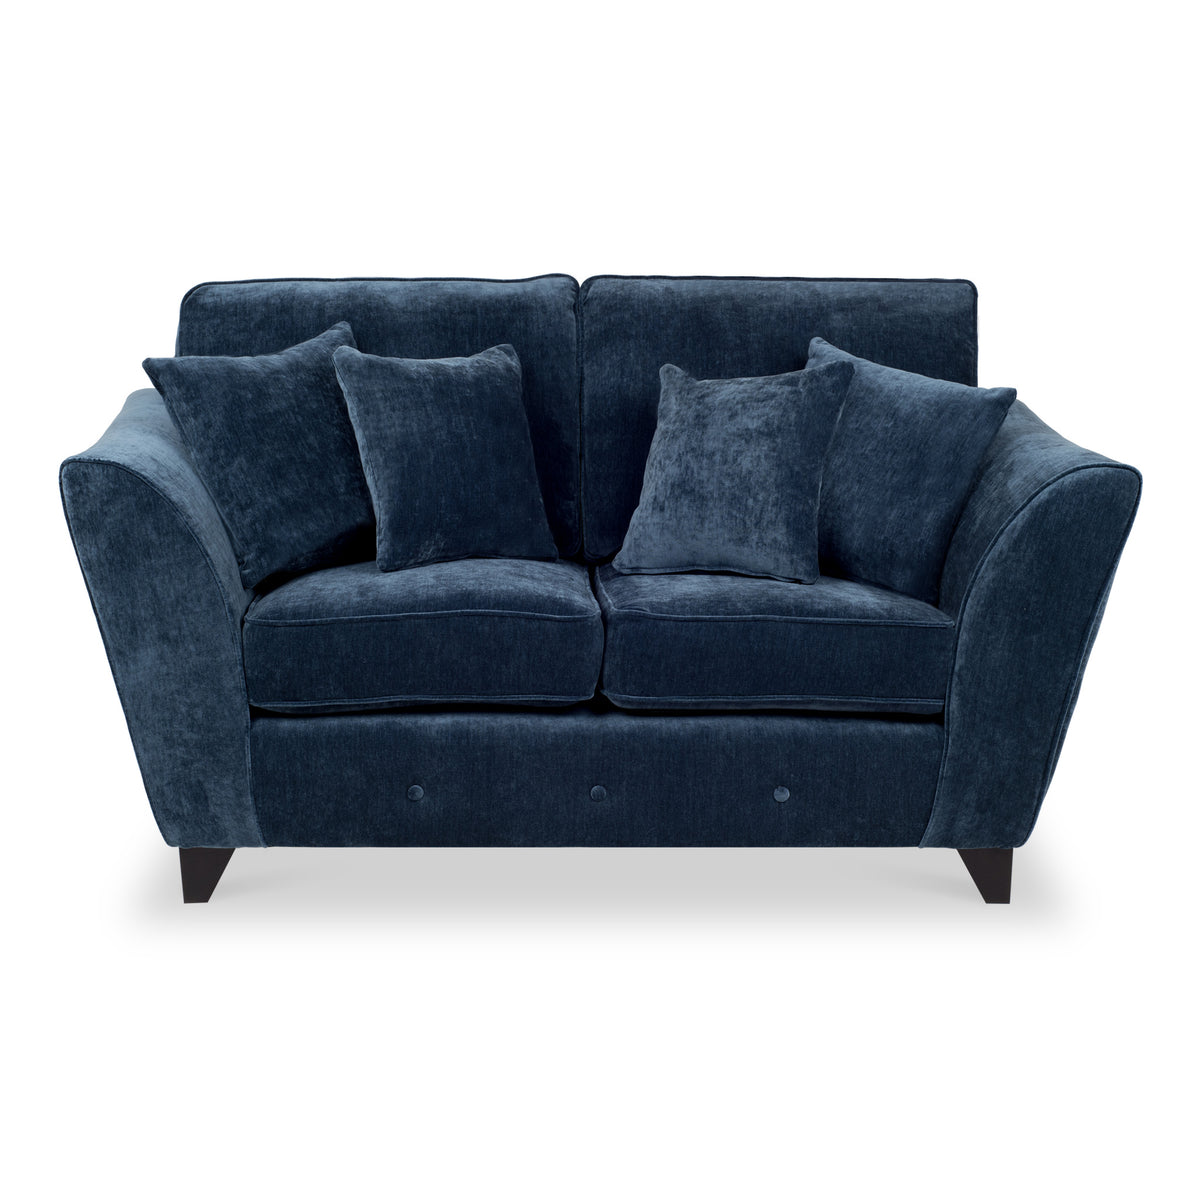 Harris 2 Seater Sofa in Navy by Roseland Furniture